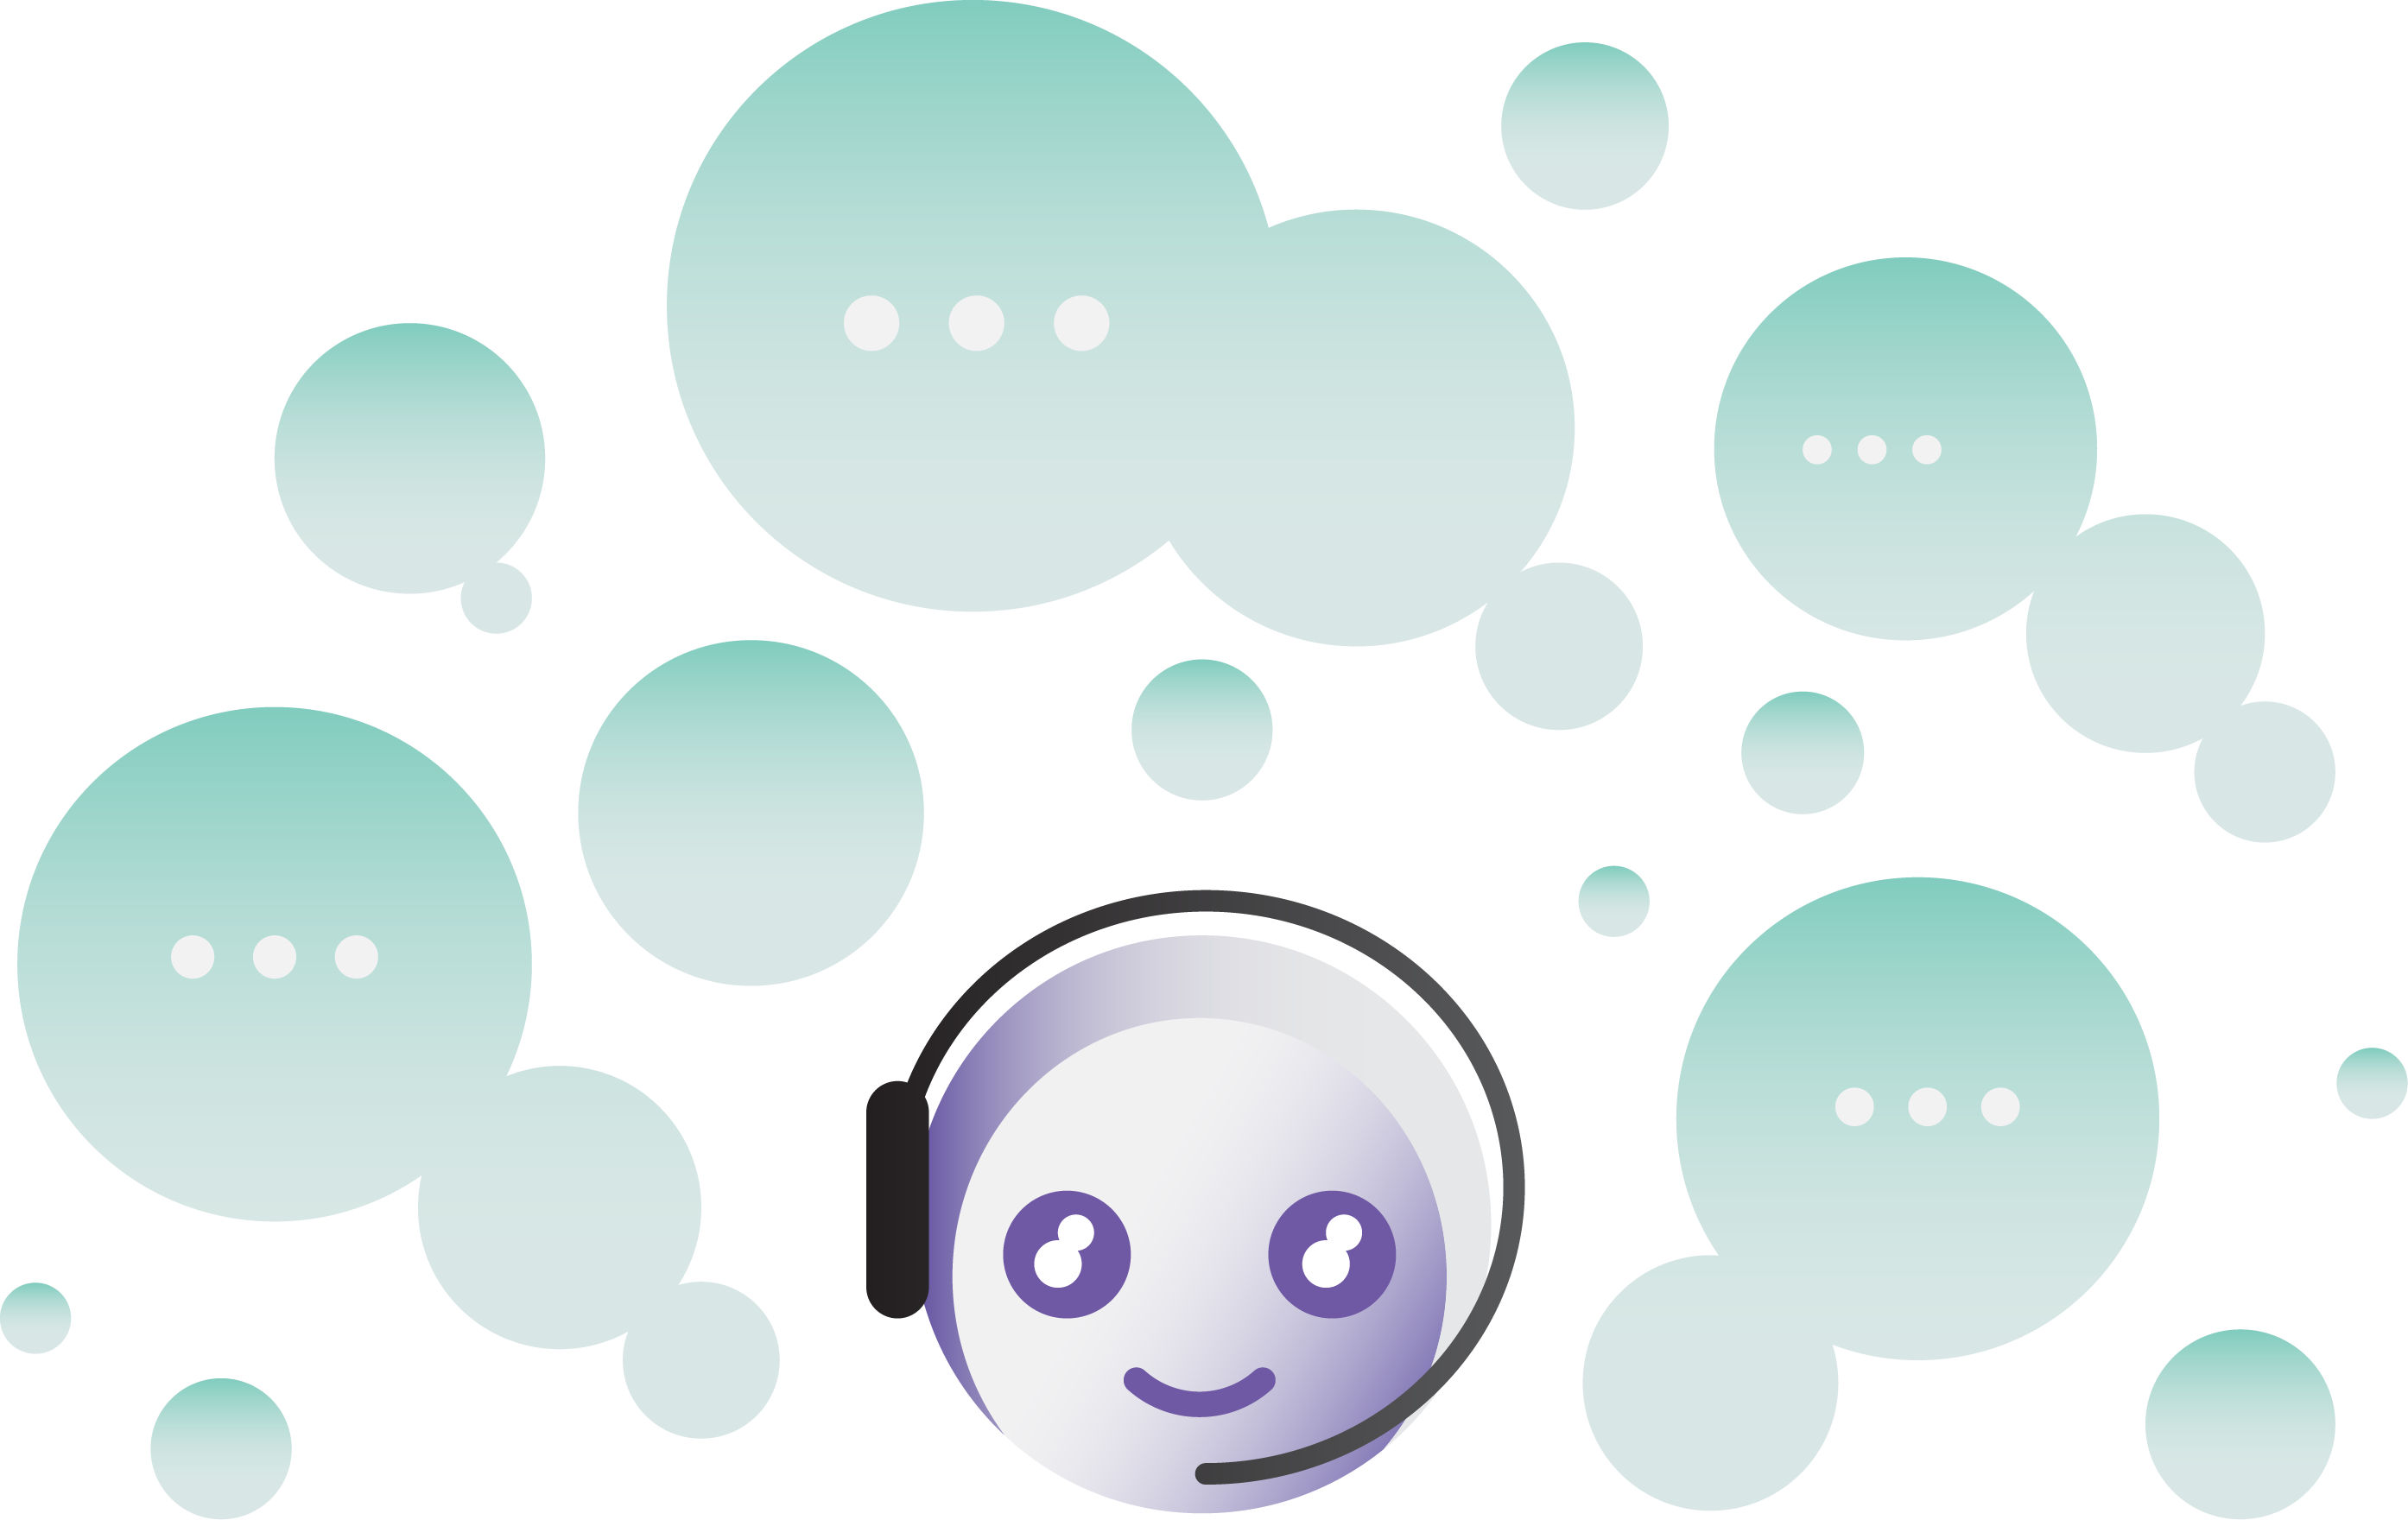 Customer chatting with chatbot